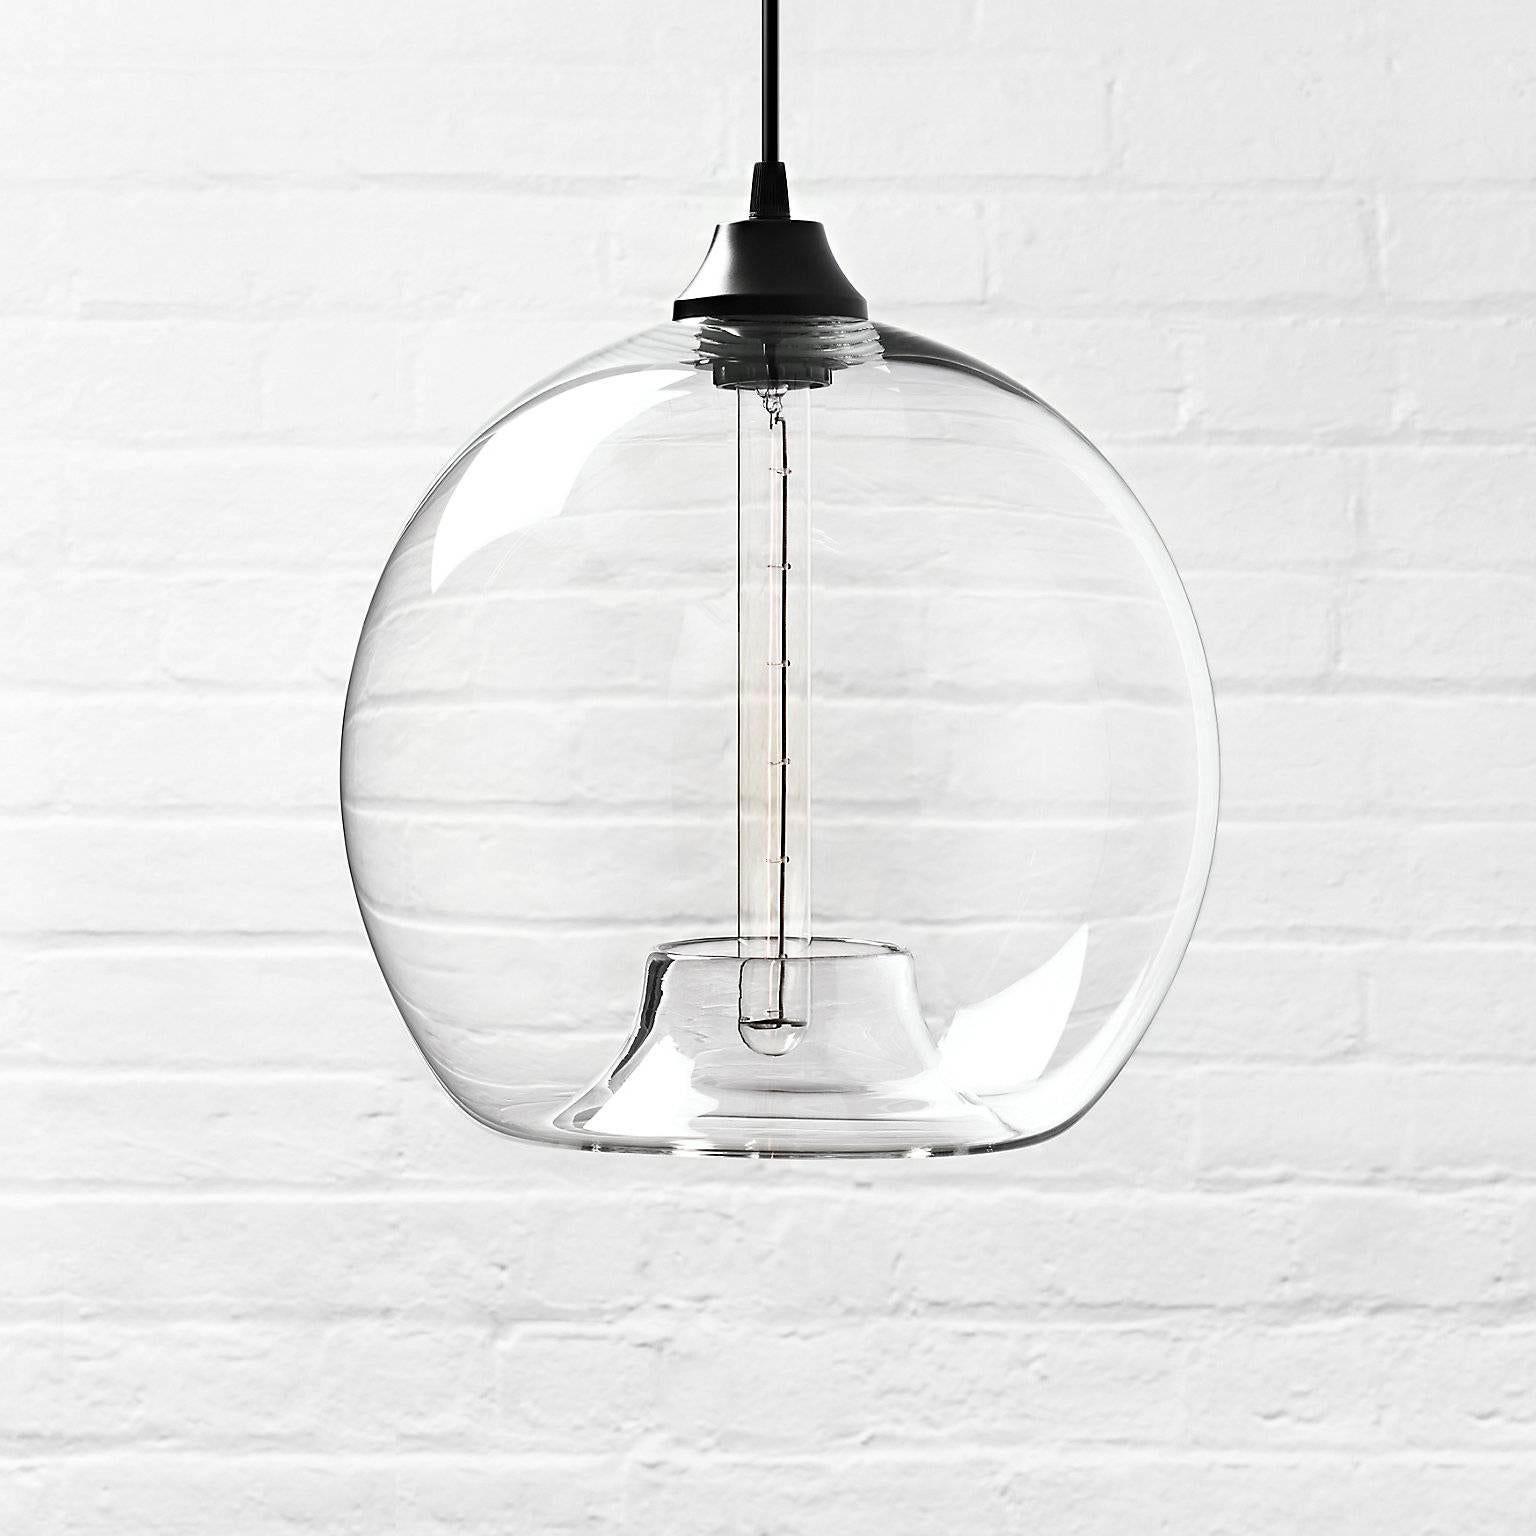 Stamen Gray Handblown Modern Glass Pendant Light, Made in the USA In New Condition For Sale In Beacon, NY